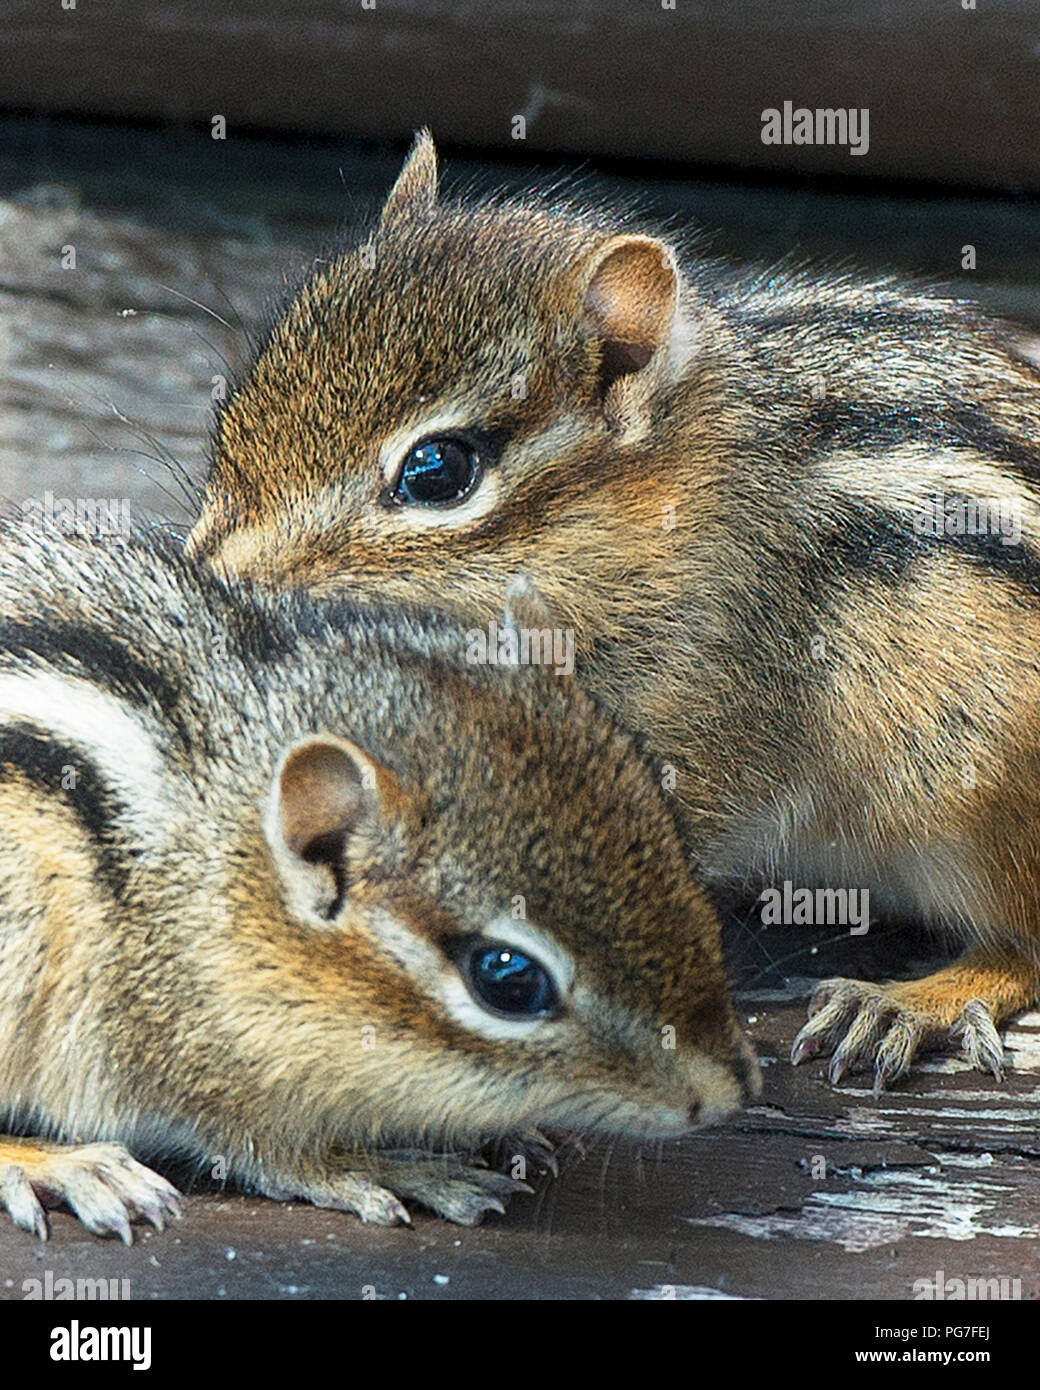 Chipmunk animal babies exposing their bodies, head, eye, nose, ears, paws, in its environment and surrounding. Beautiful baby chipmunks. Stock Photo